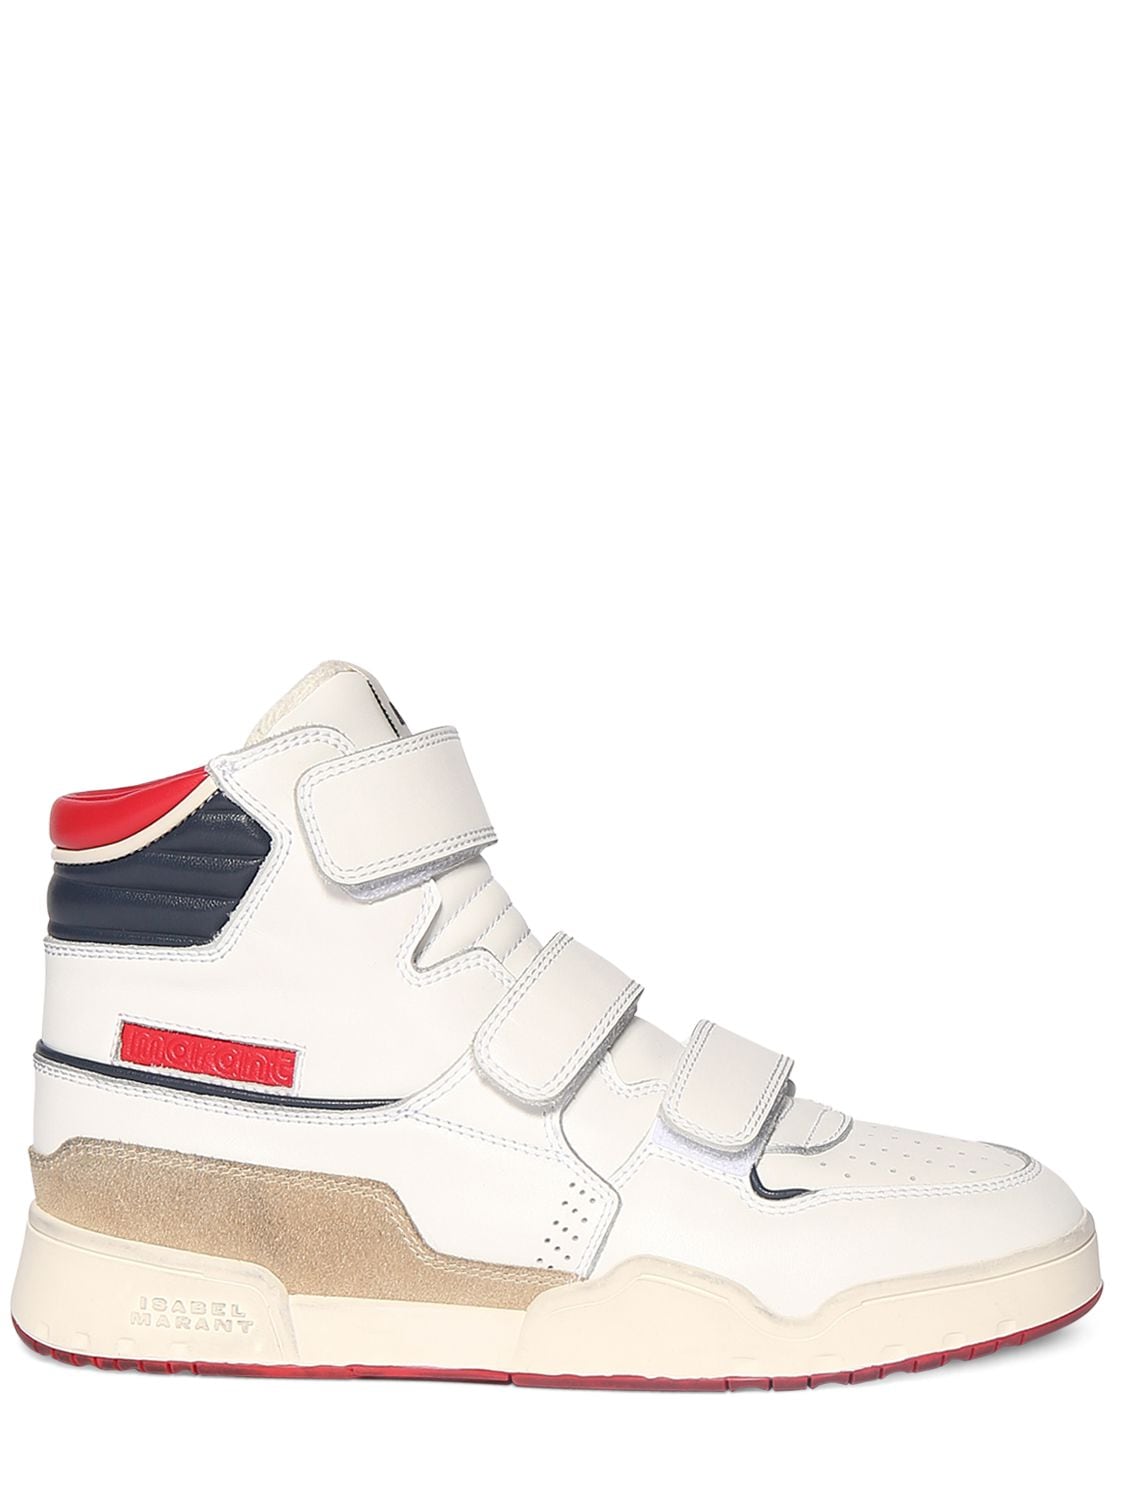 ISABEL MARANT ONEY HIGH LEATHER SNEAKERS